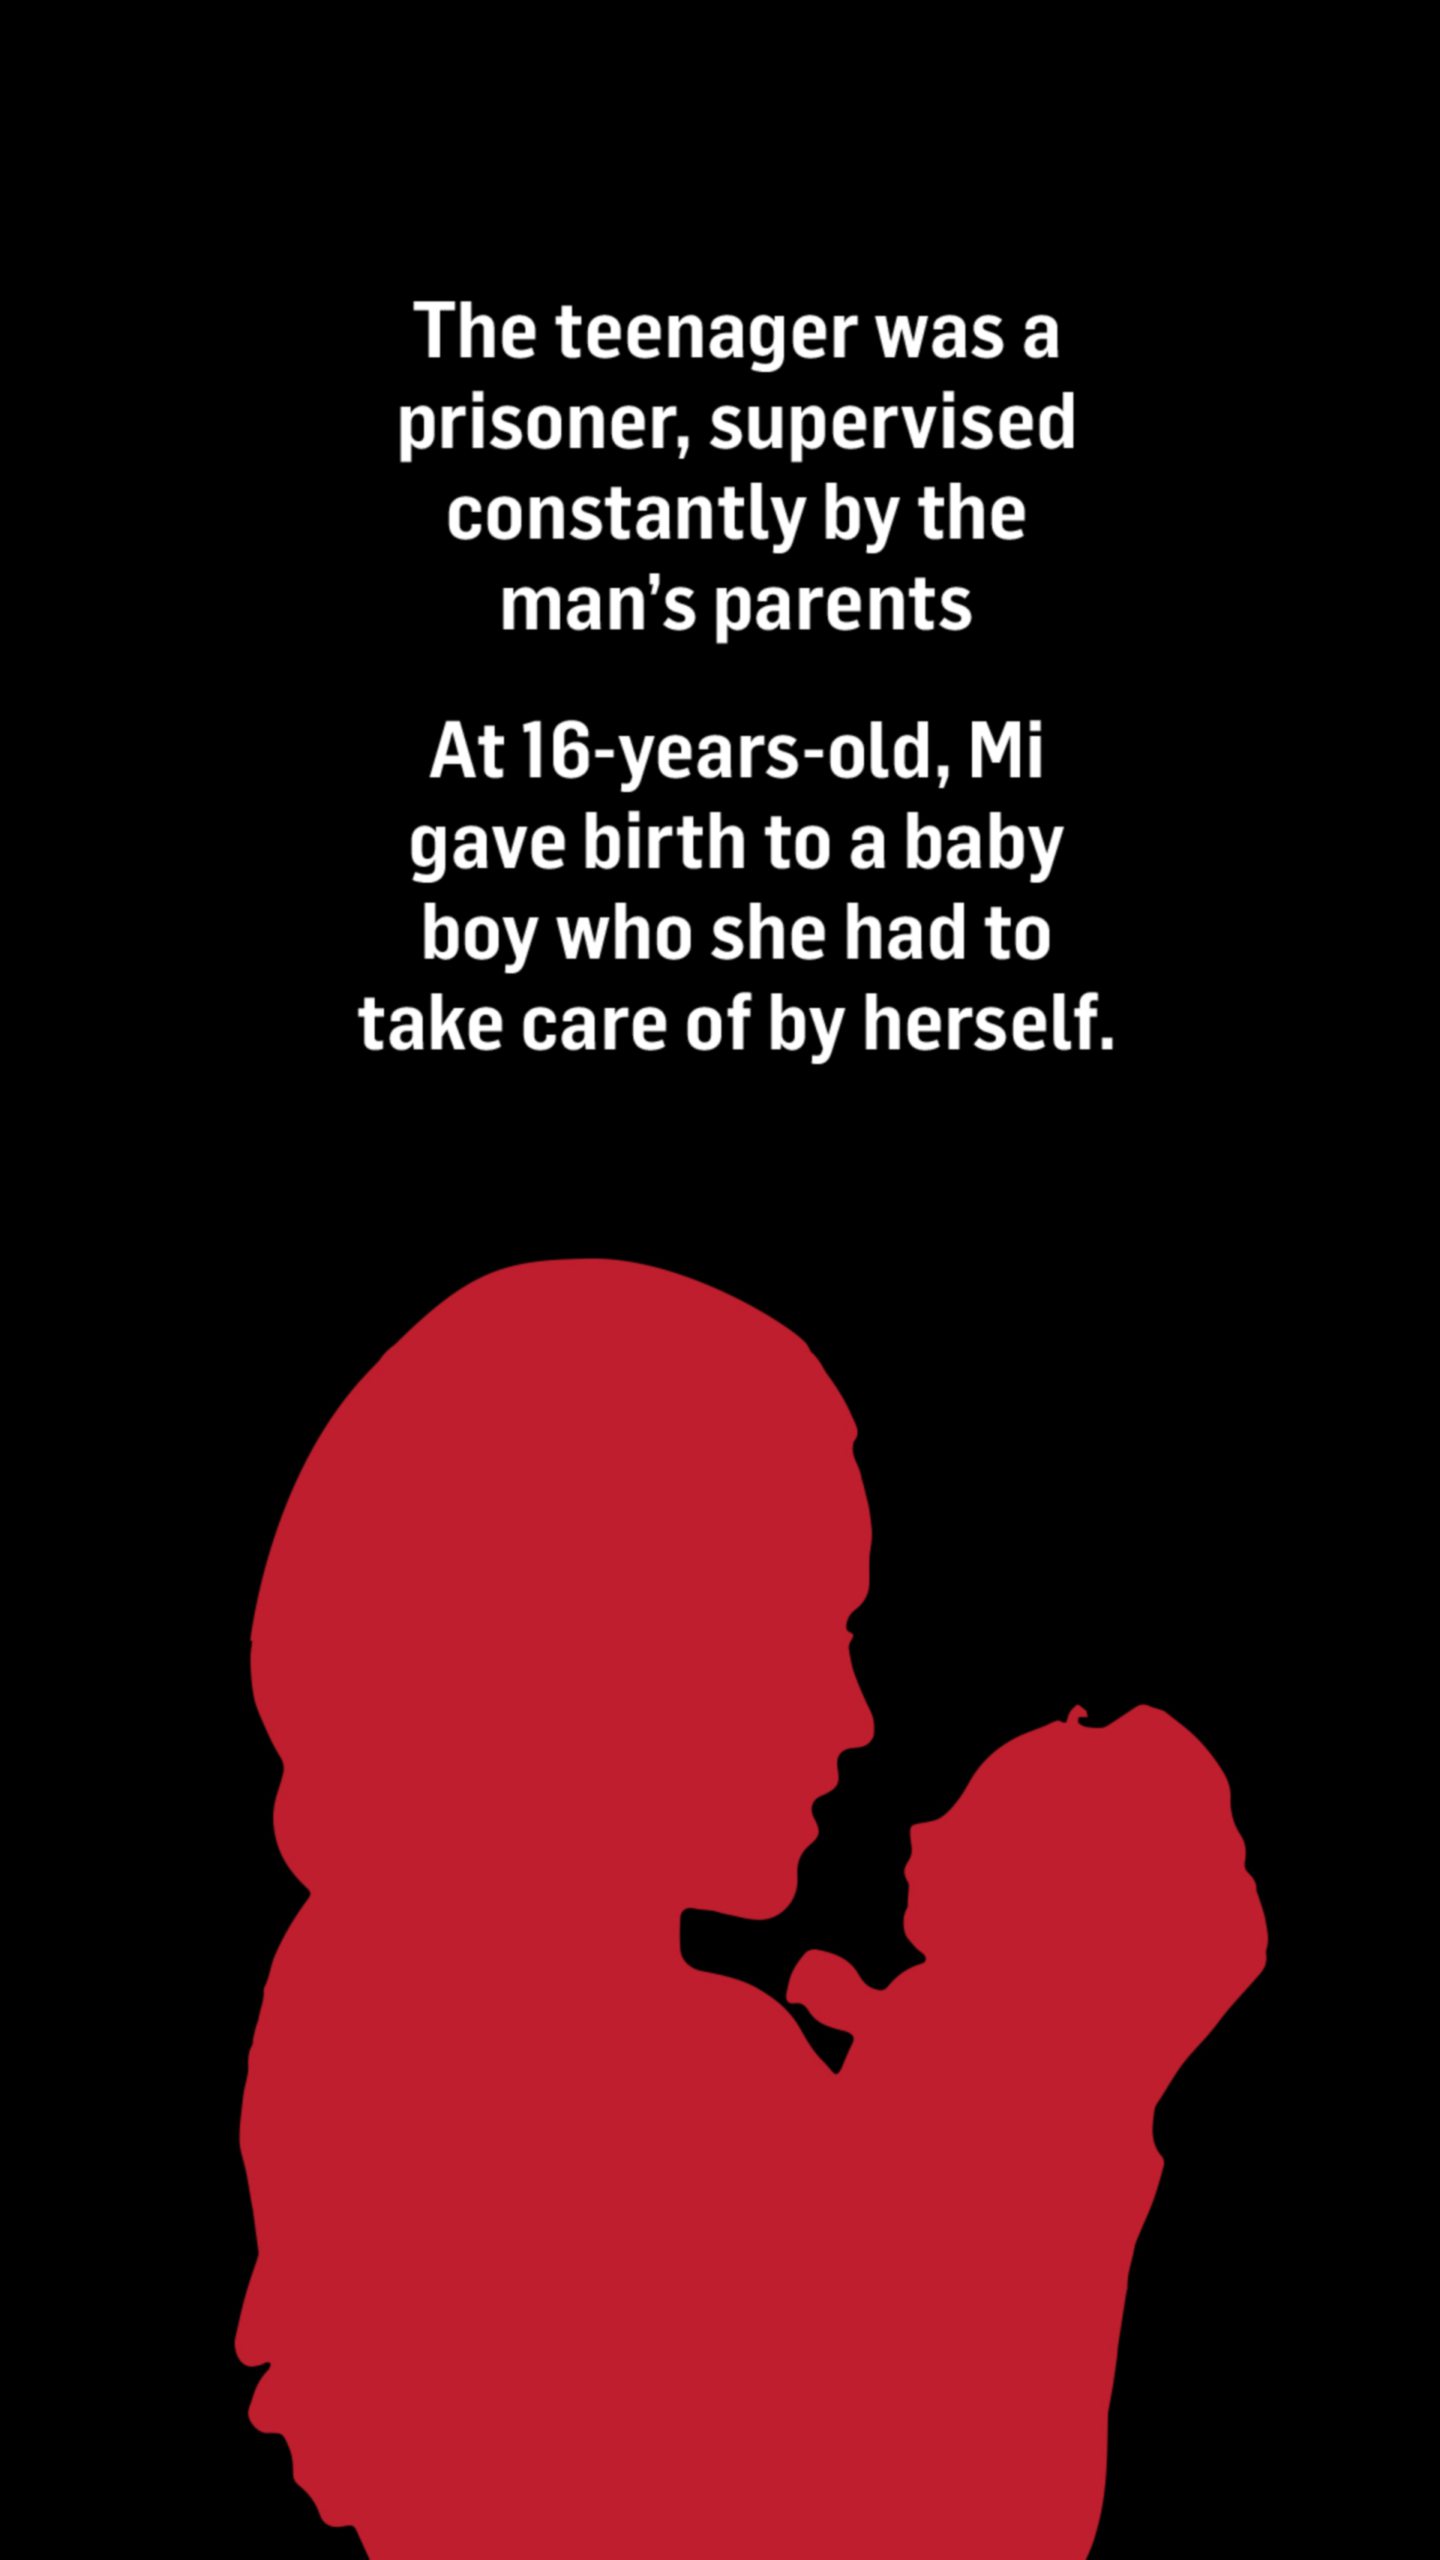 An illustration of a silhouette of a woman holding a baby. Words above the image read: The teenager was a prisoner, supervised constantly her the man's parents.

At 16-years-old, Mi gave birth to a baby boy who she had to take care of by herself.